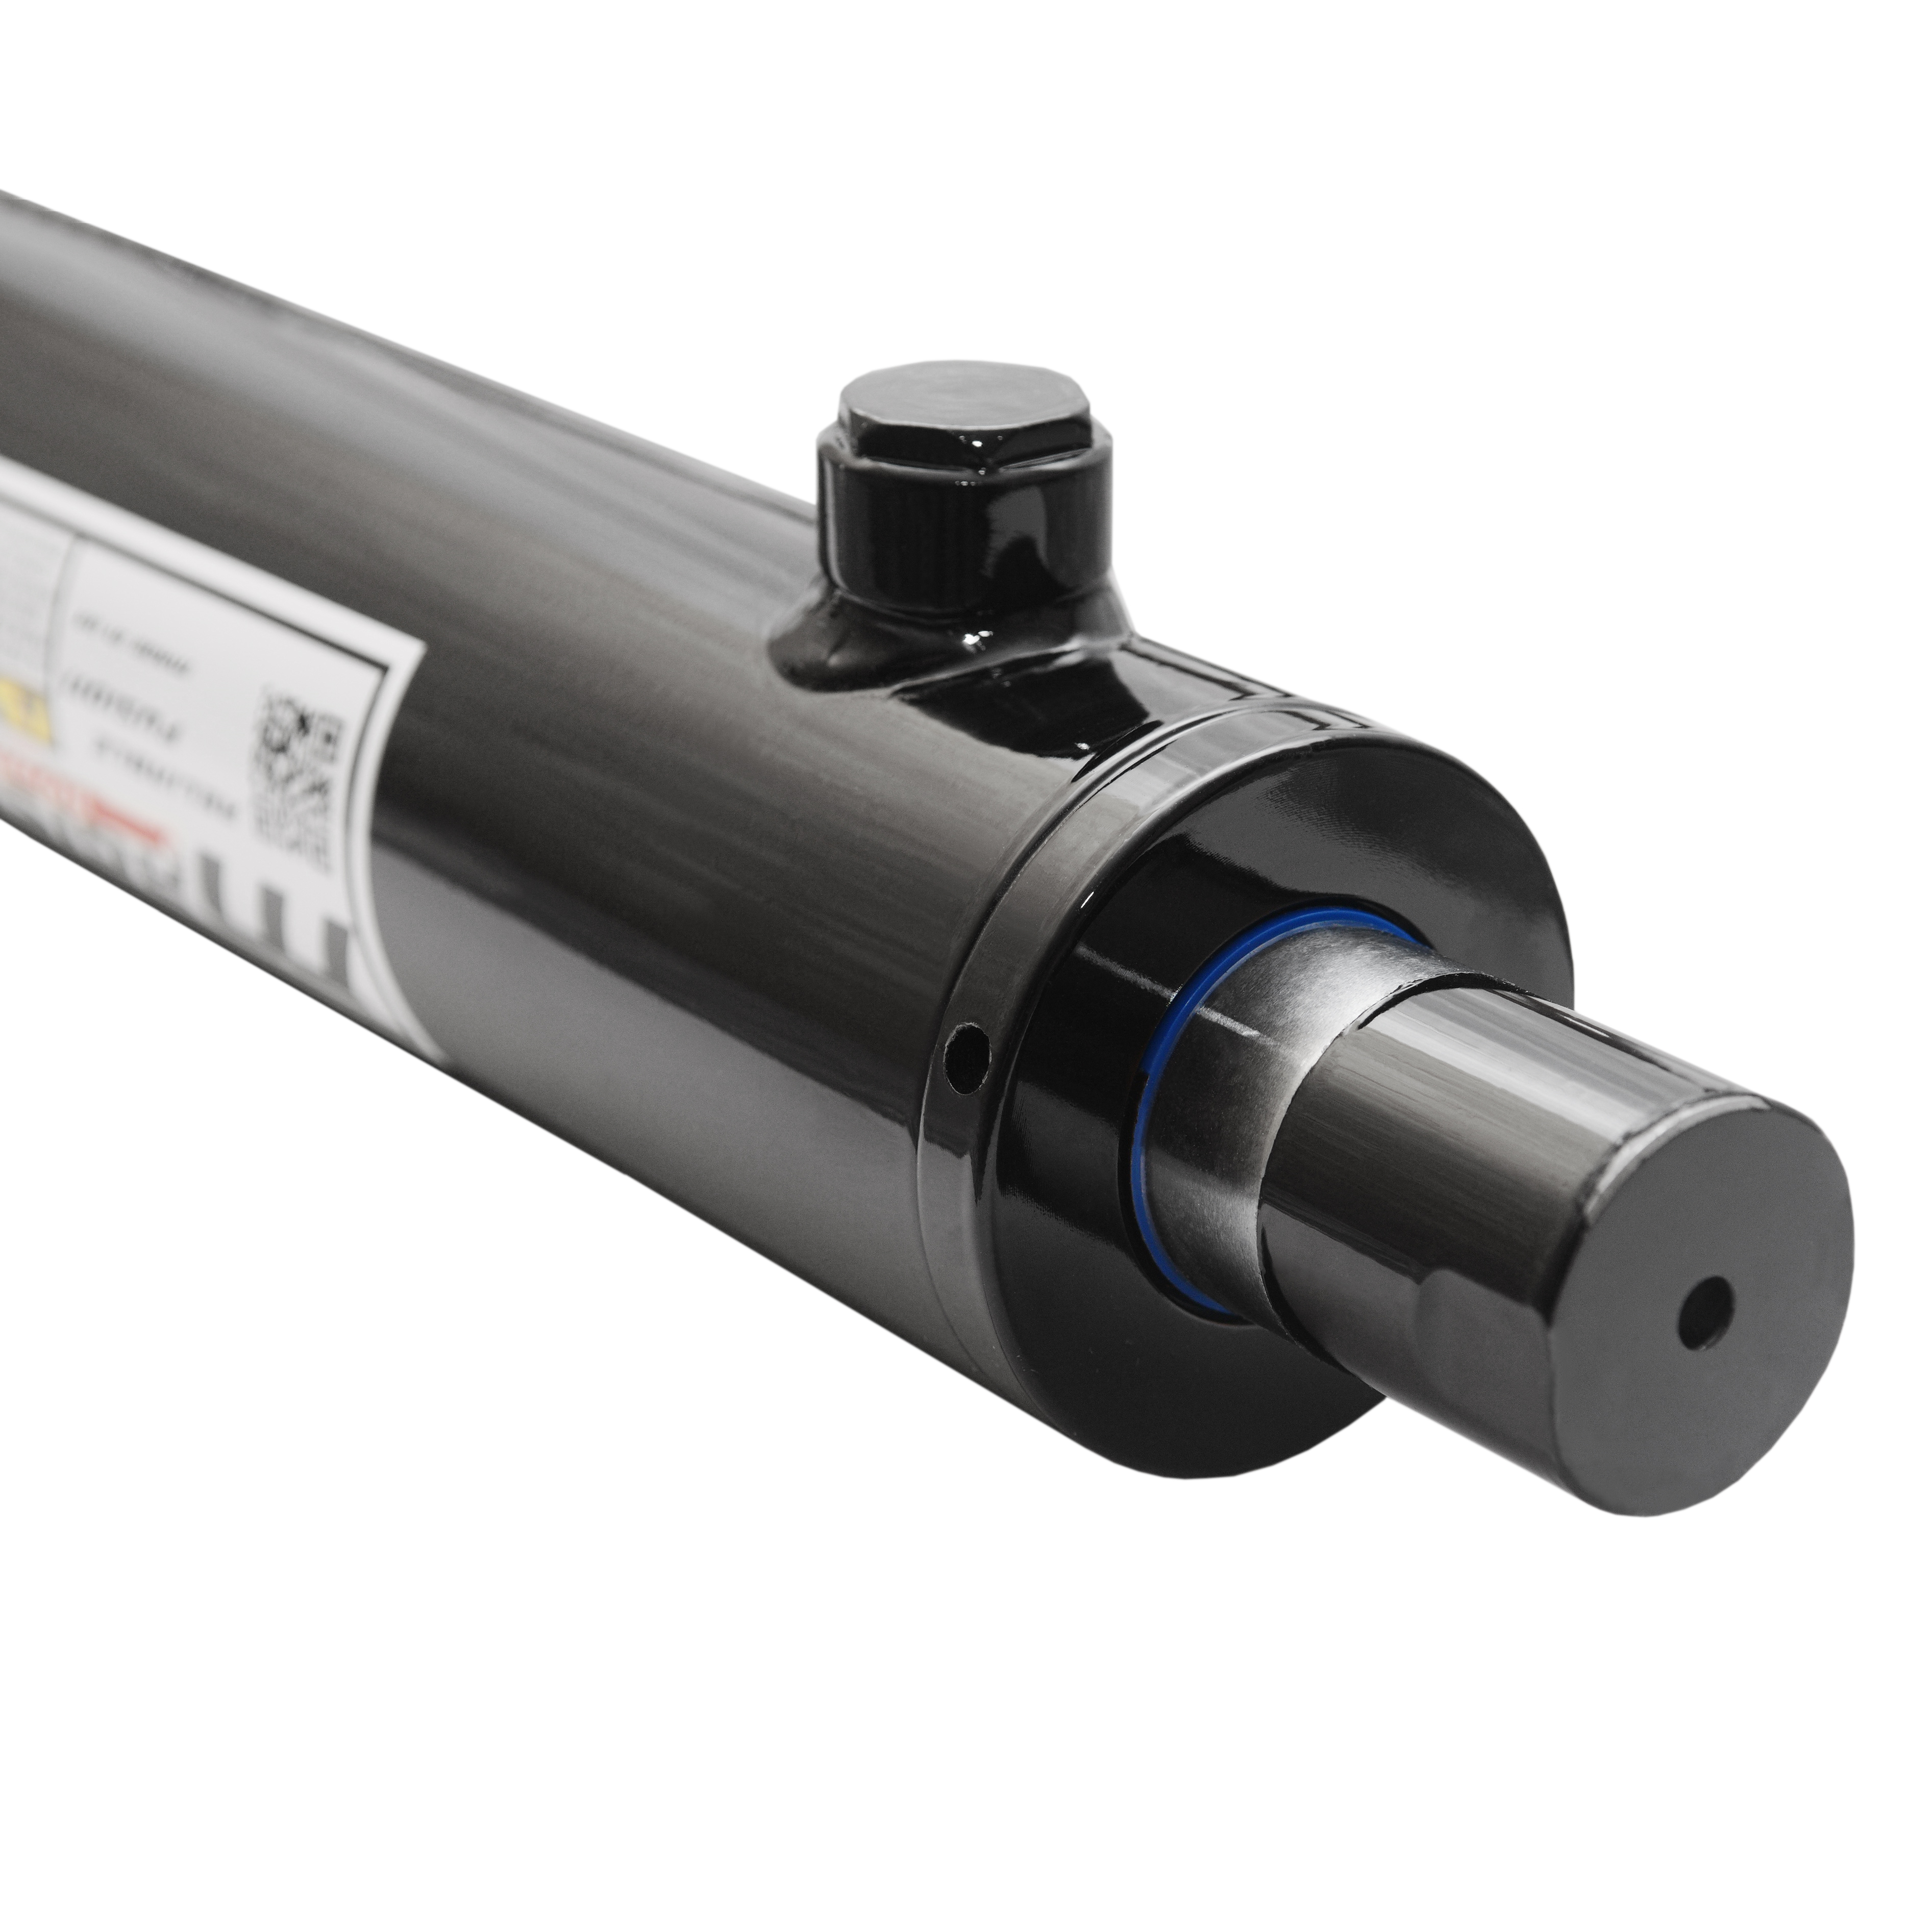 WEN CC2016 Clevis Hydraulic Cylinder with 2-inch Bore and 16-inch Stroke 